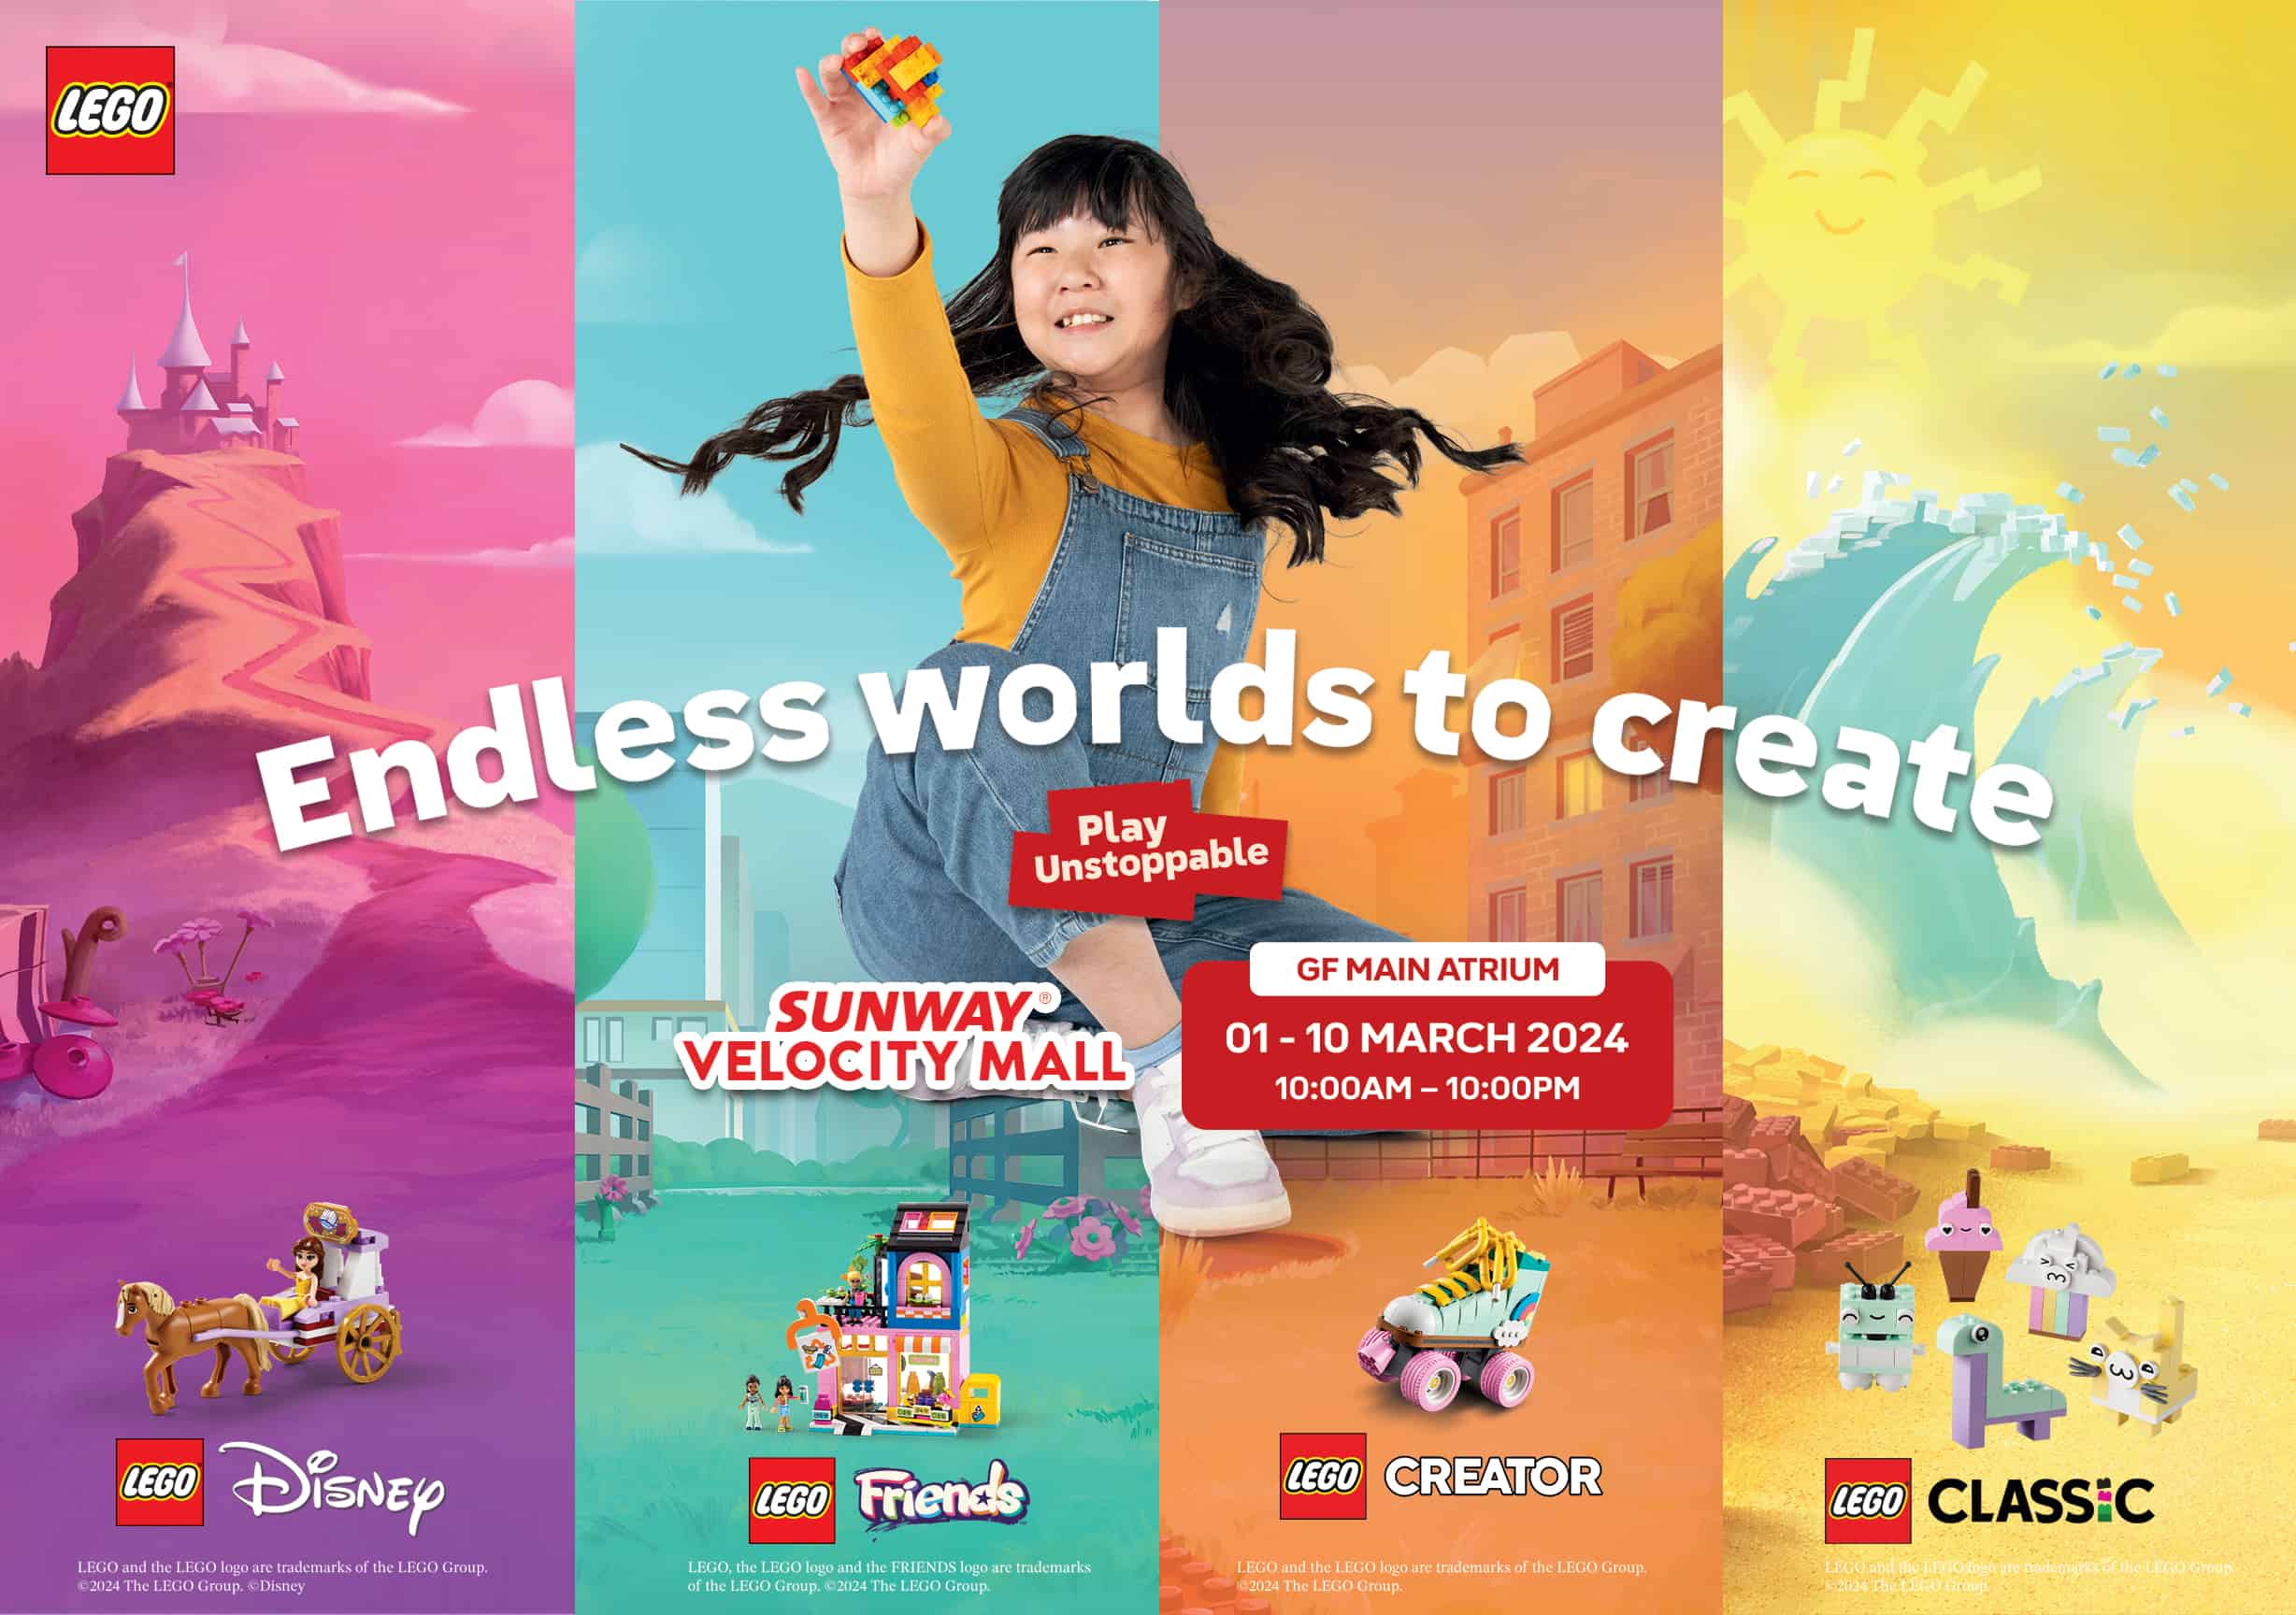 Empowering girls brick by brick with The LEGO® Group’s new Play Unstoppable campaign!